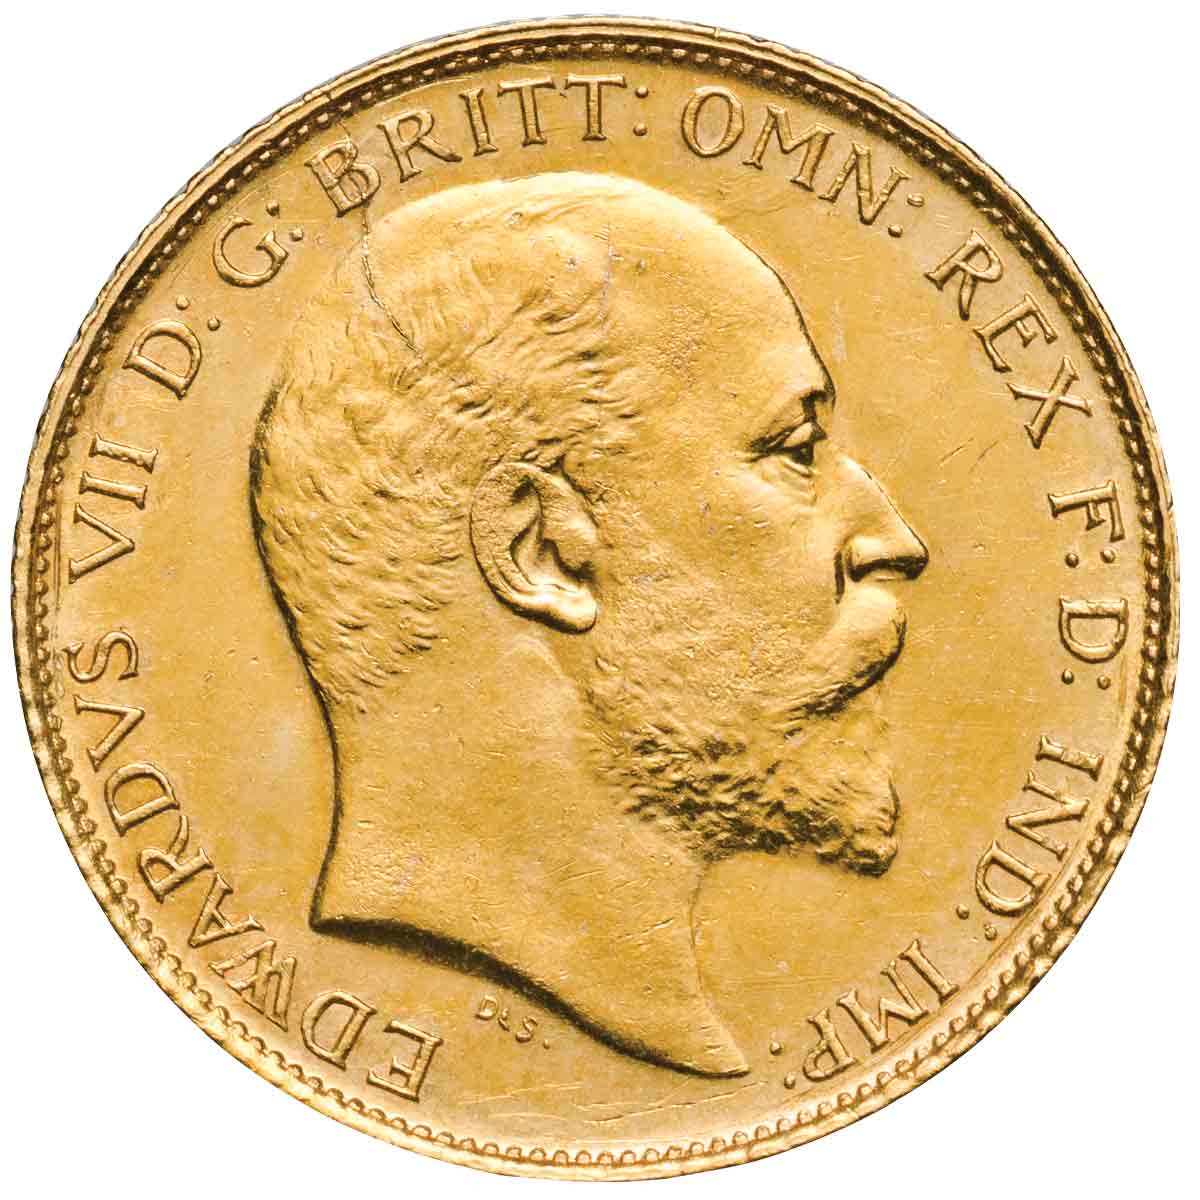 Edward VII 1902S Gold Half Sovereign about Uncirculated